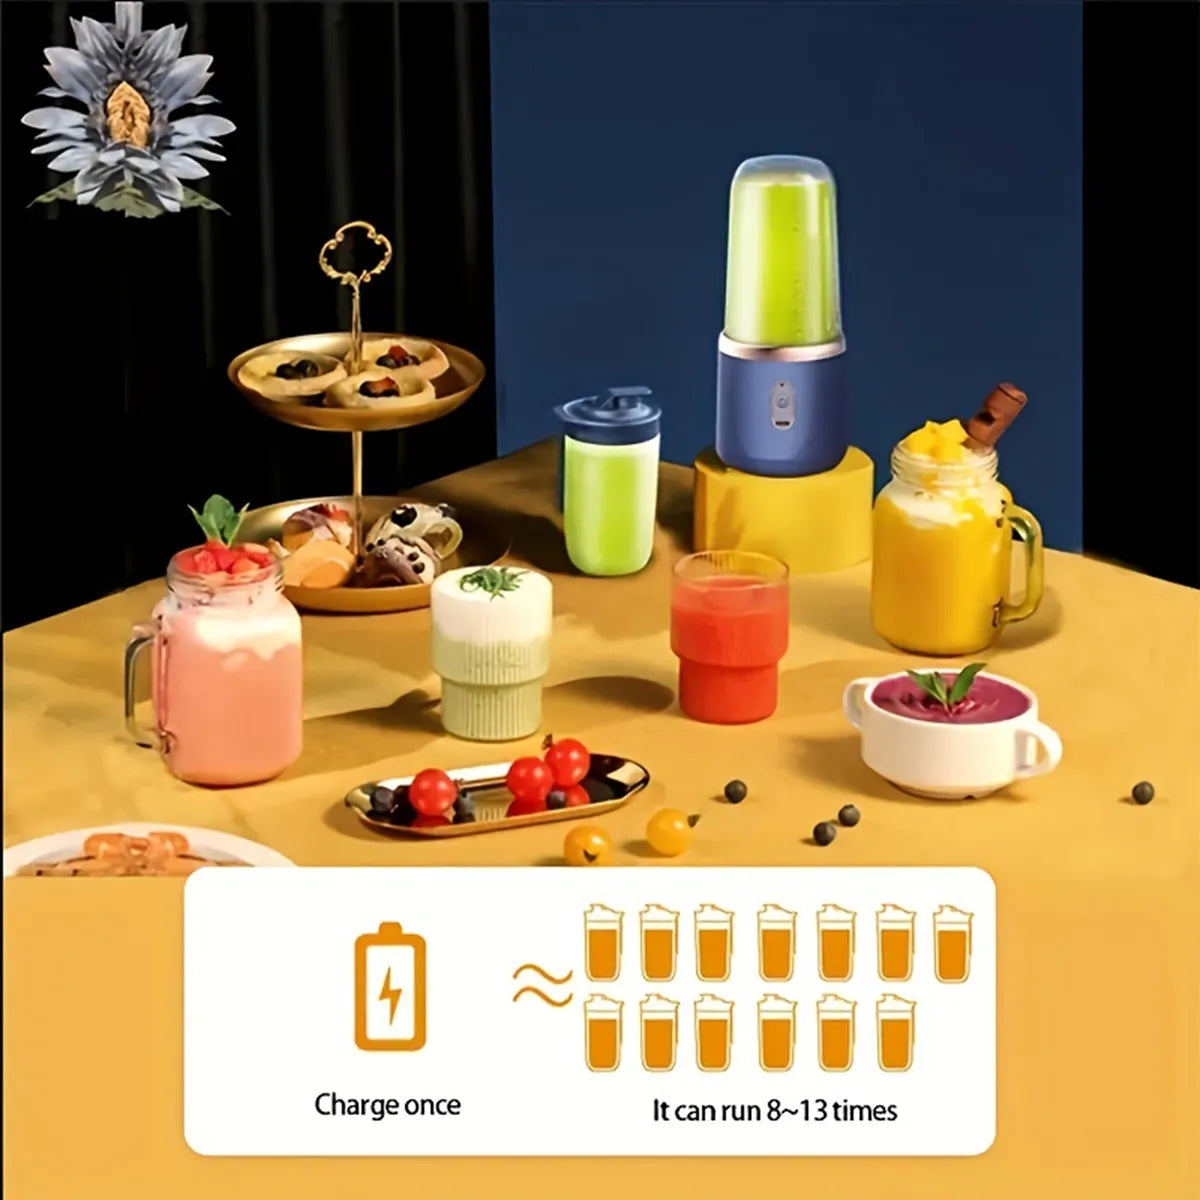 Various beverages made with the Portable USB Electric Juicer Blender, including smoothies and milkshakes. The image emphasizes the product's ability to charge once and blend 8-13 times, showcasing its practicality and versatility.